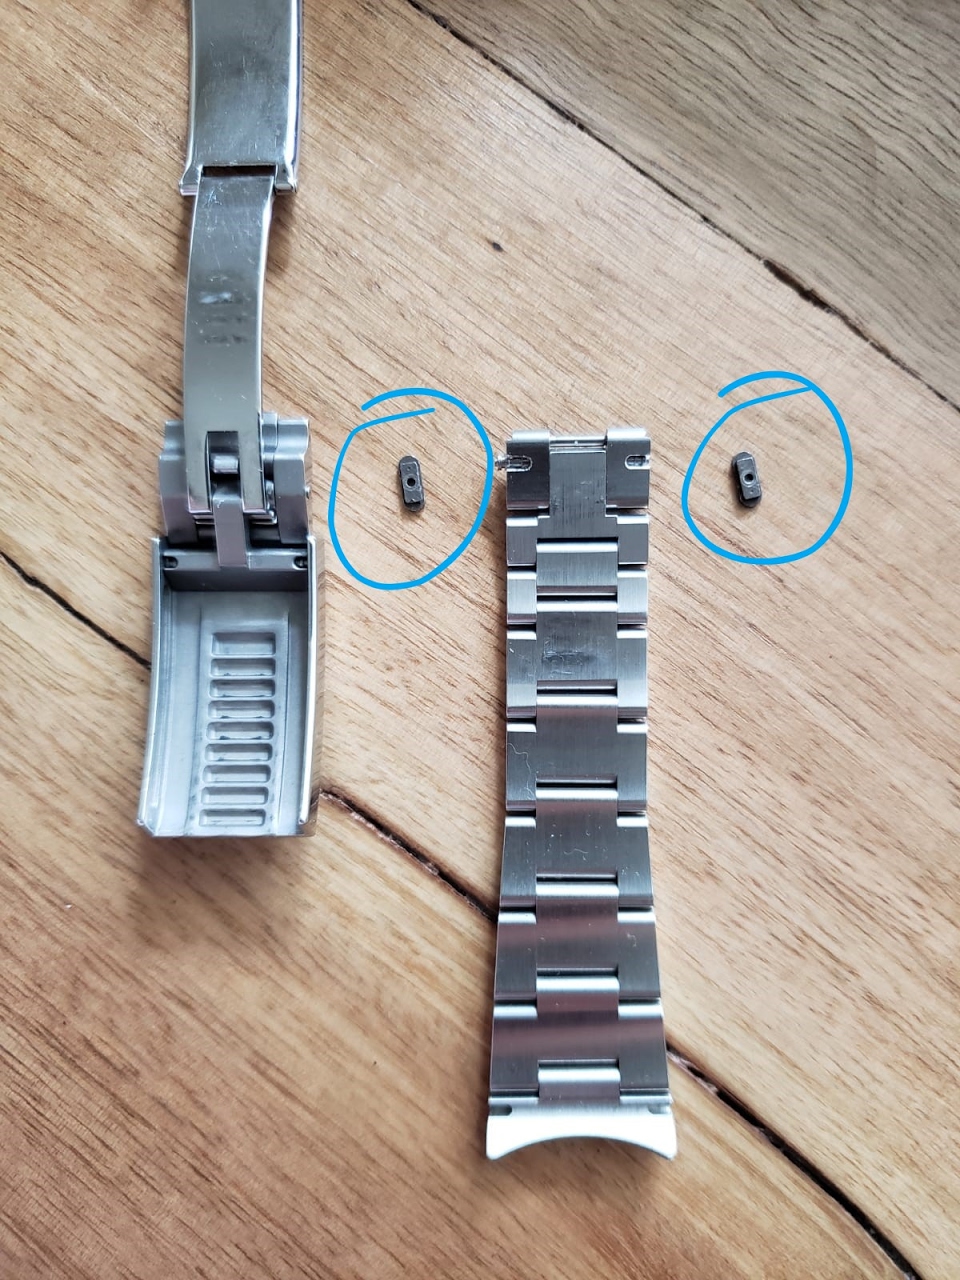 Clasp question: I am not familiar with how to fix claps. The clasp